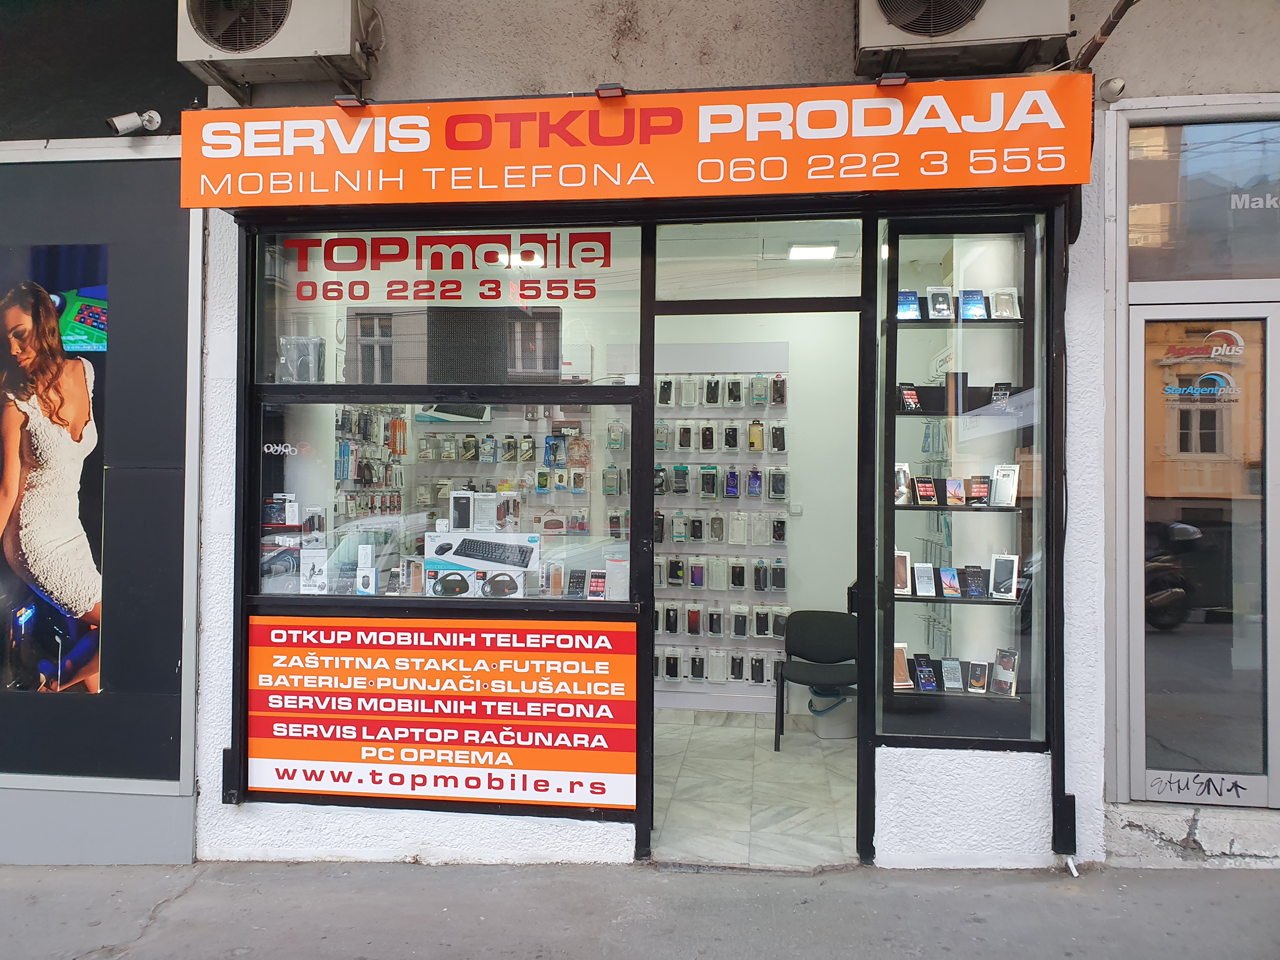 TOP MOBILE - PURCHASE, SERVICE AND SALE OF MOBILE PHONES Servisi mobilnih telefona Beograd